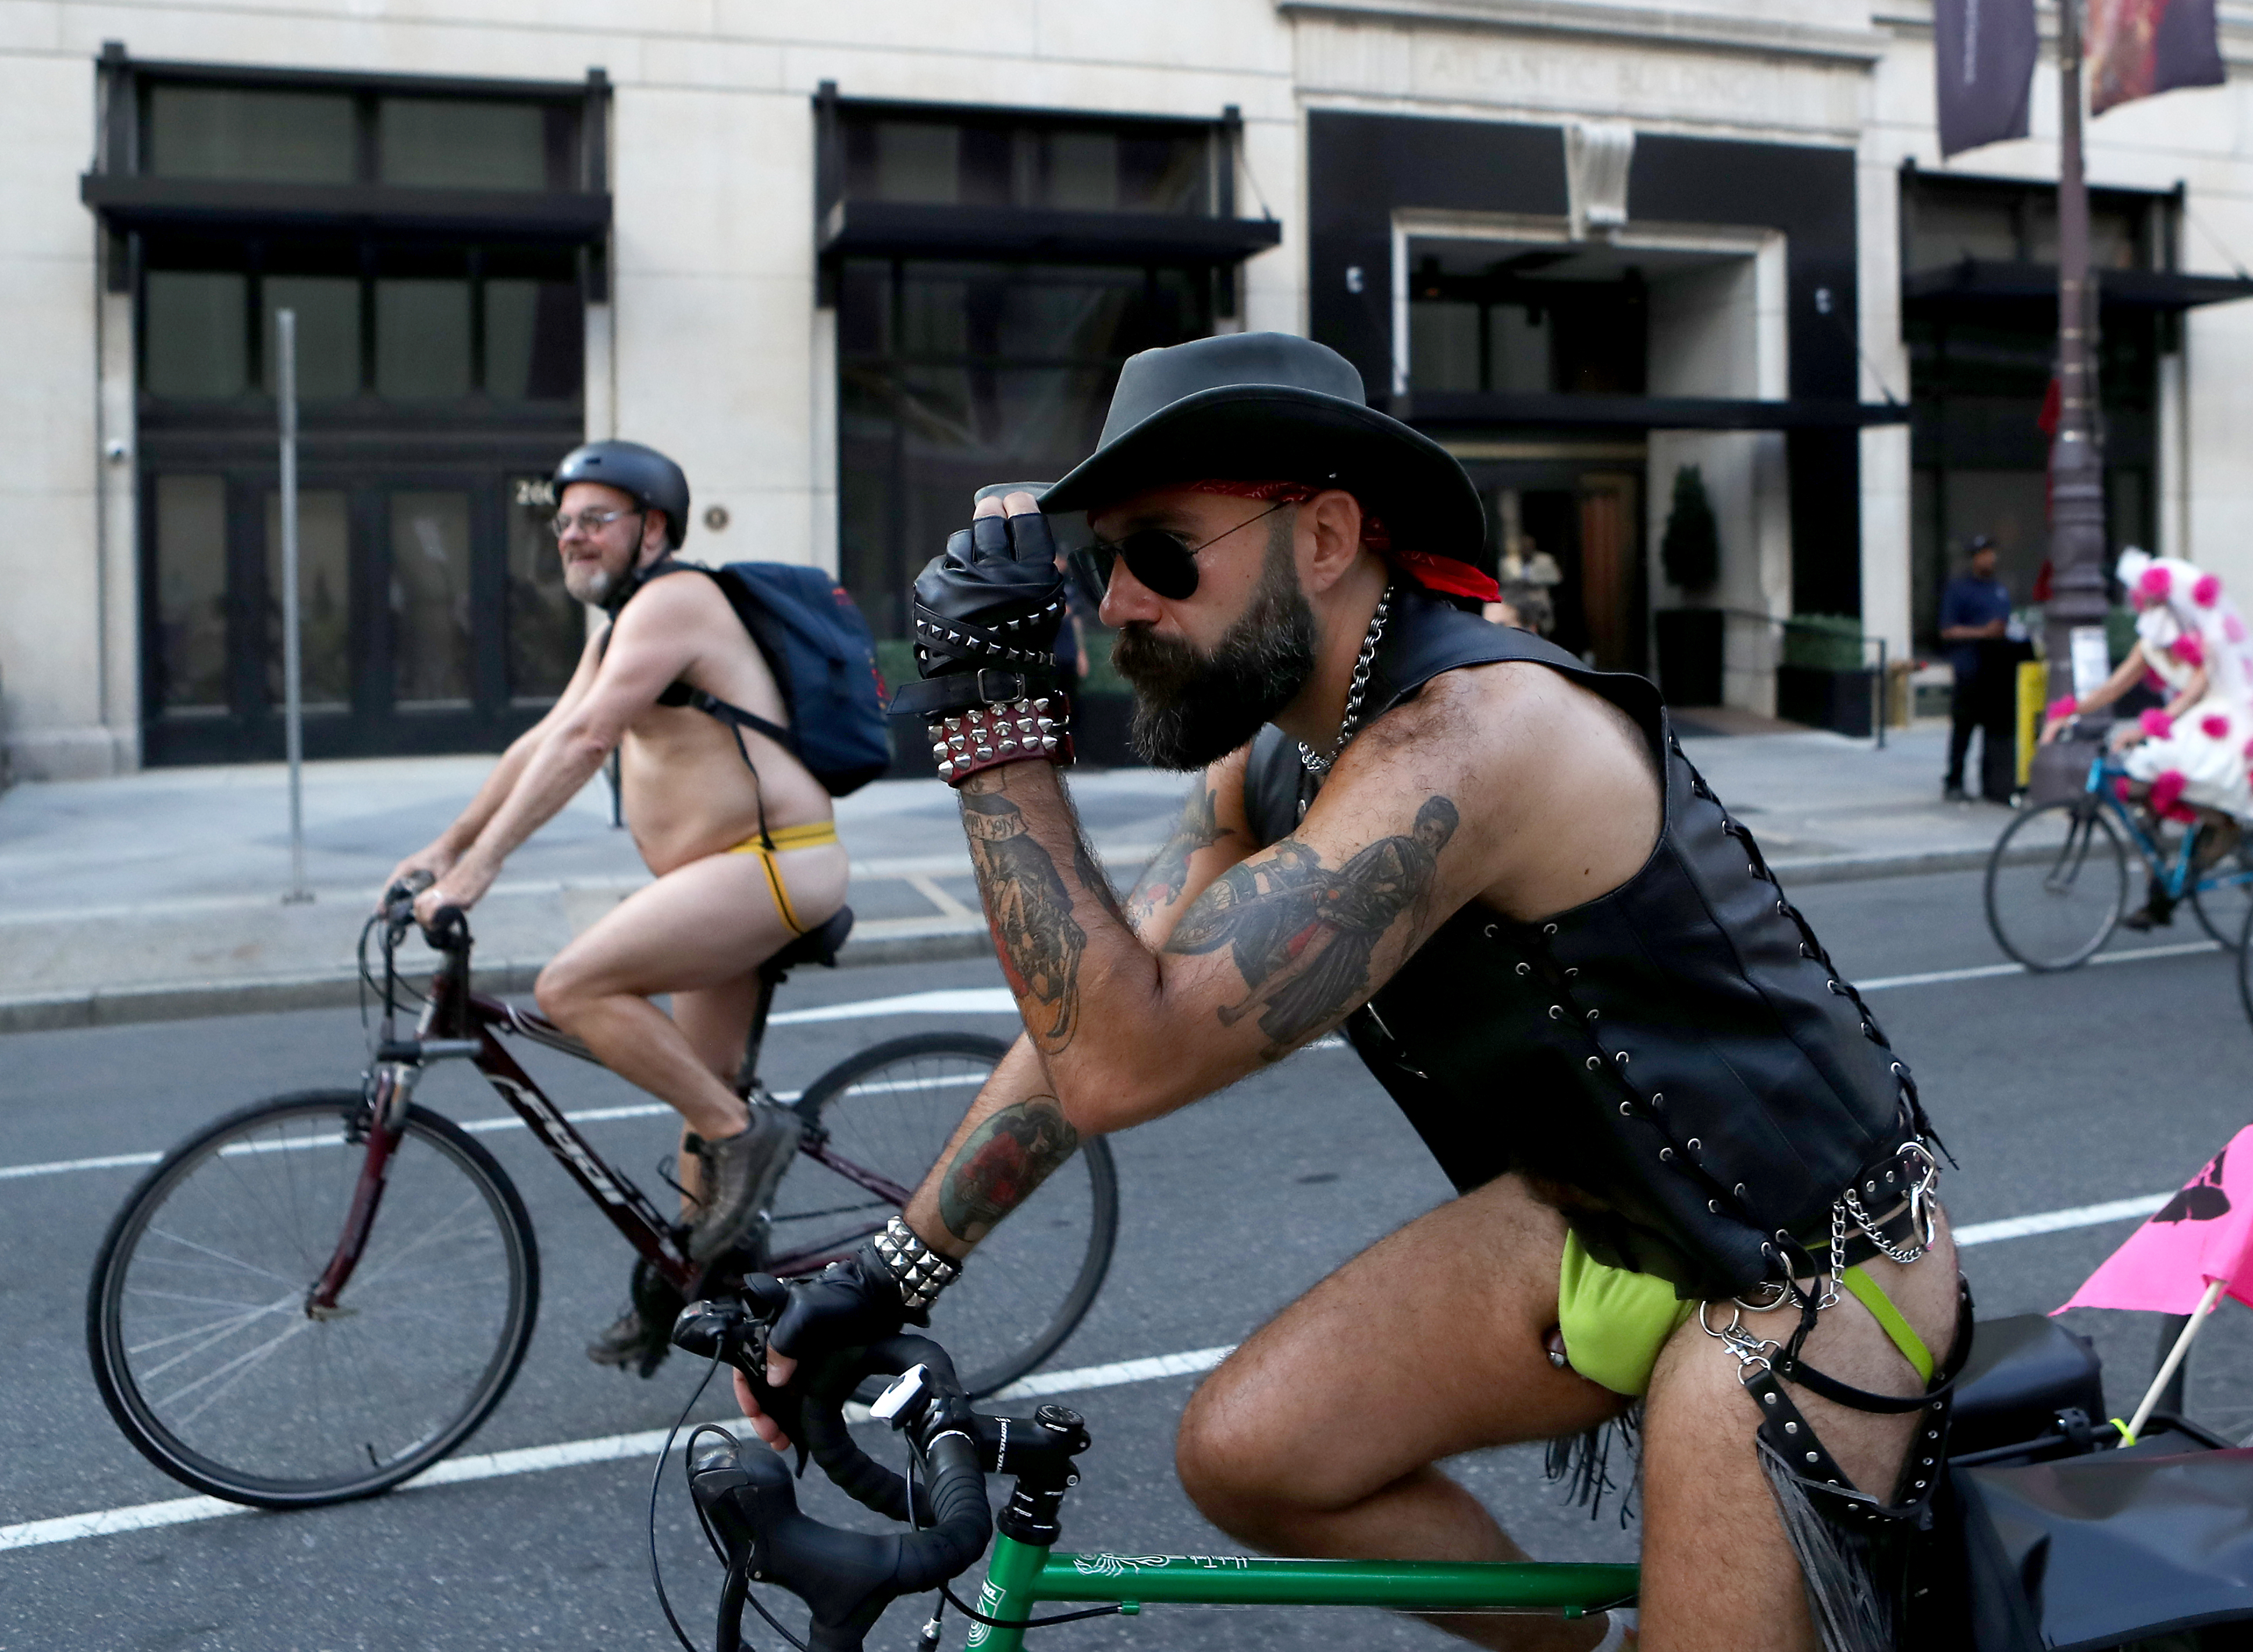 People ride bikes along South Broad Street in Philadelphia during the Philly Naked Bike Ride, Saturday, Aug. 27, 2022.